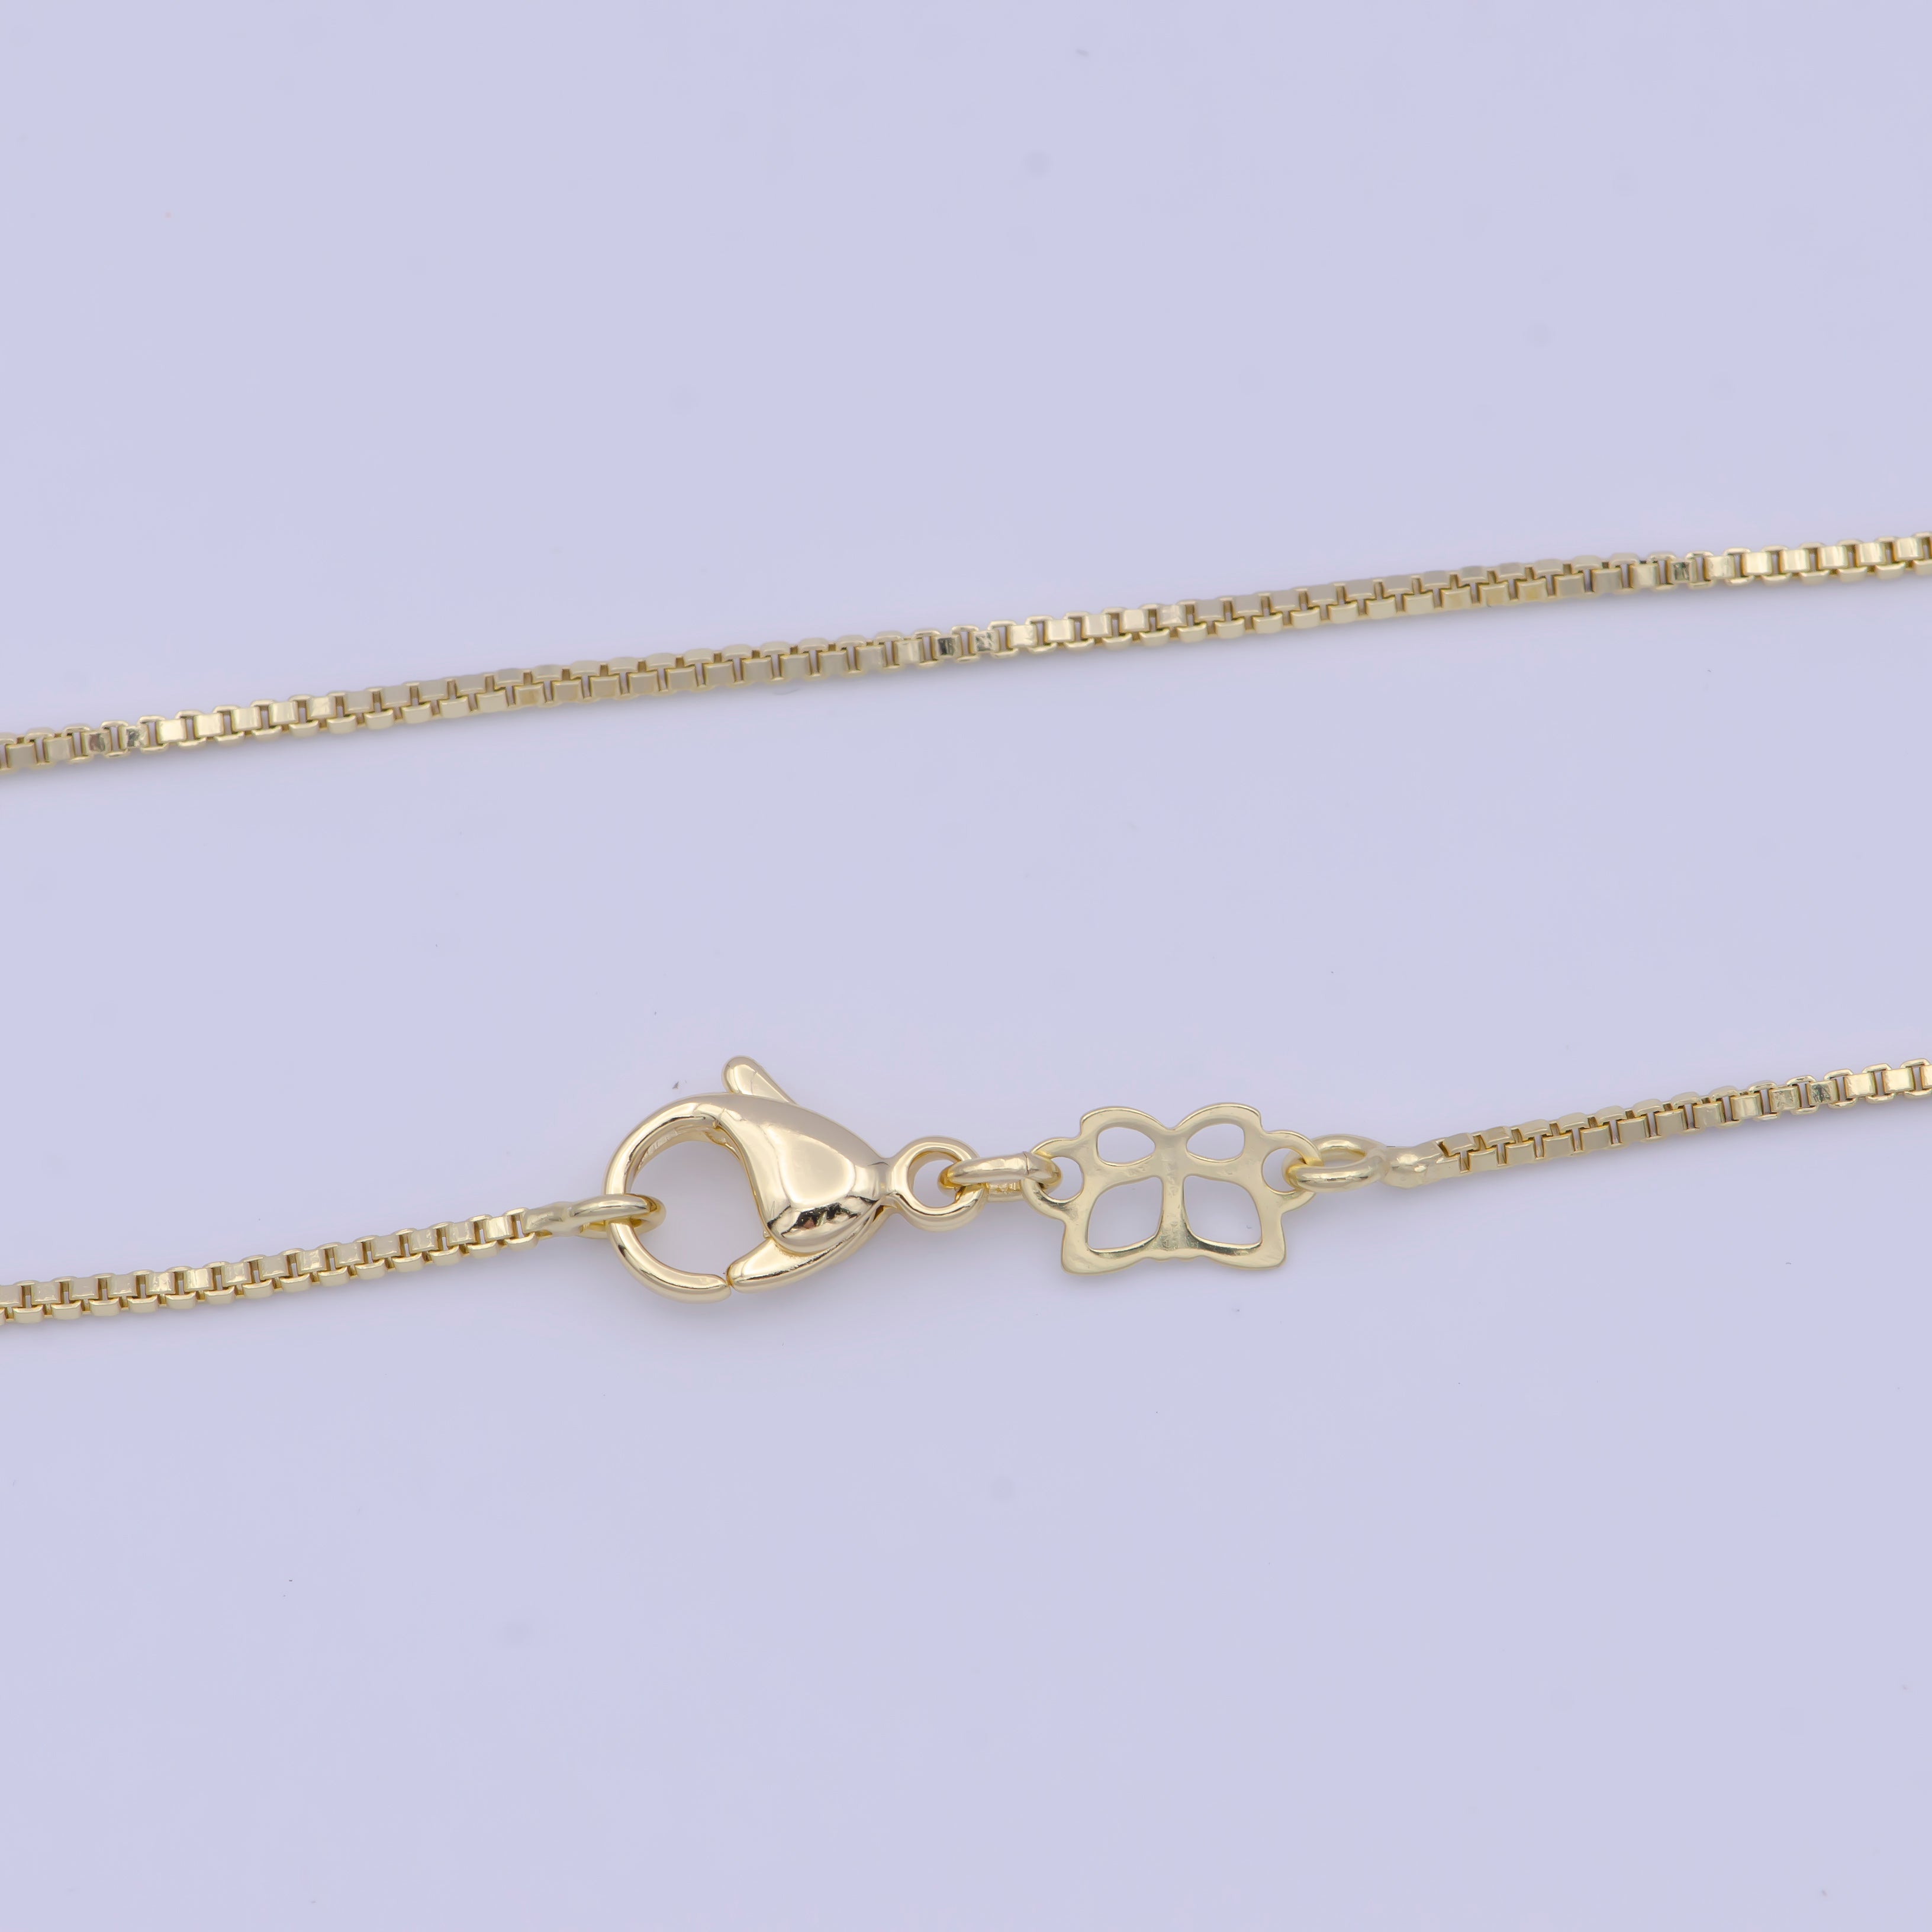 Dainty Box Chain 18" Ready to Wear 14k Gold Filled Box Chain with Lobster Clasp, Simple Everyday Layering Necklace WA-1115 - DLUXCA